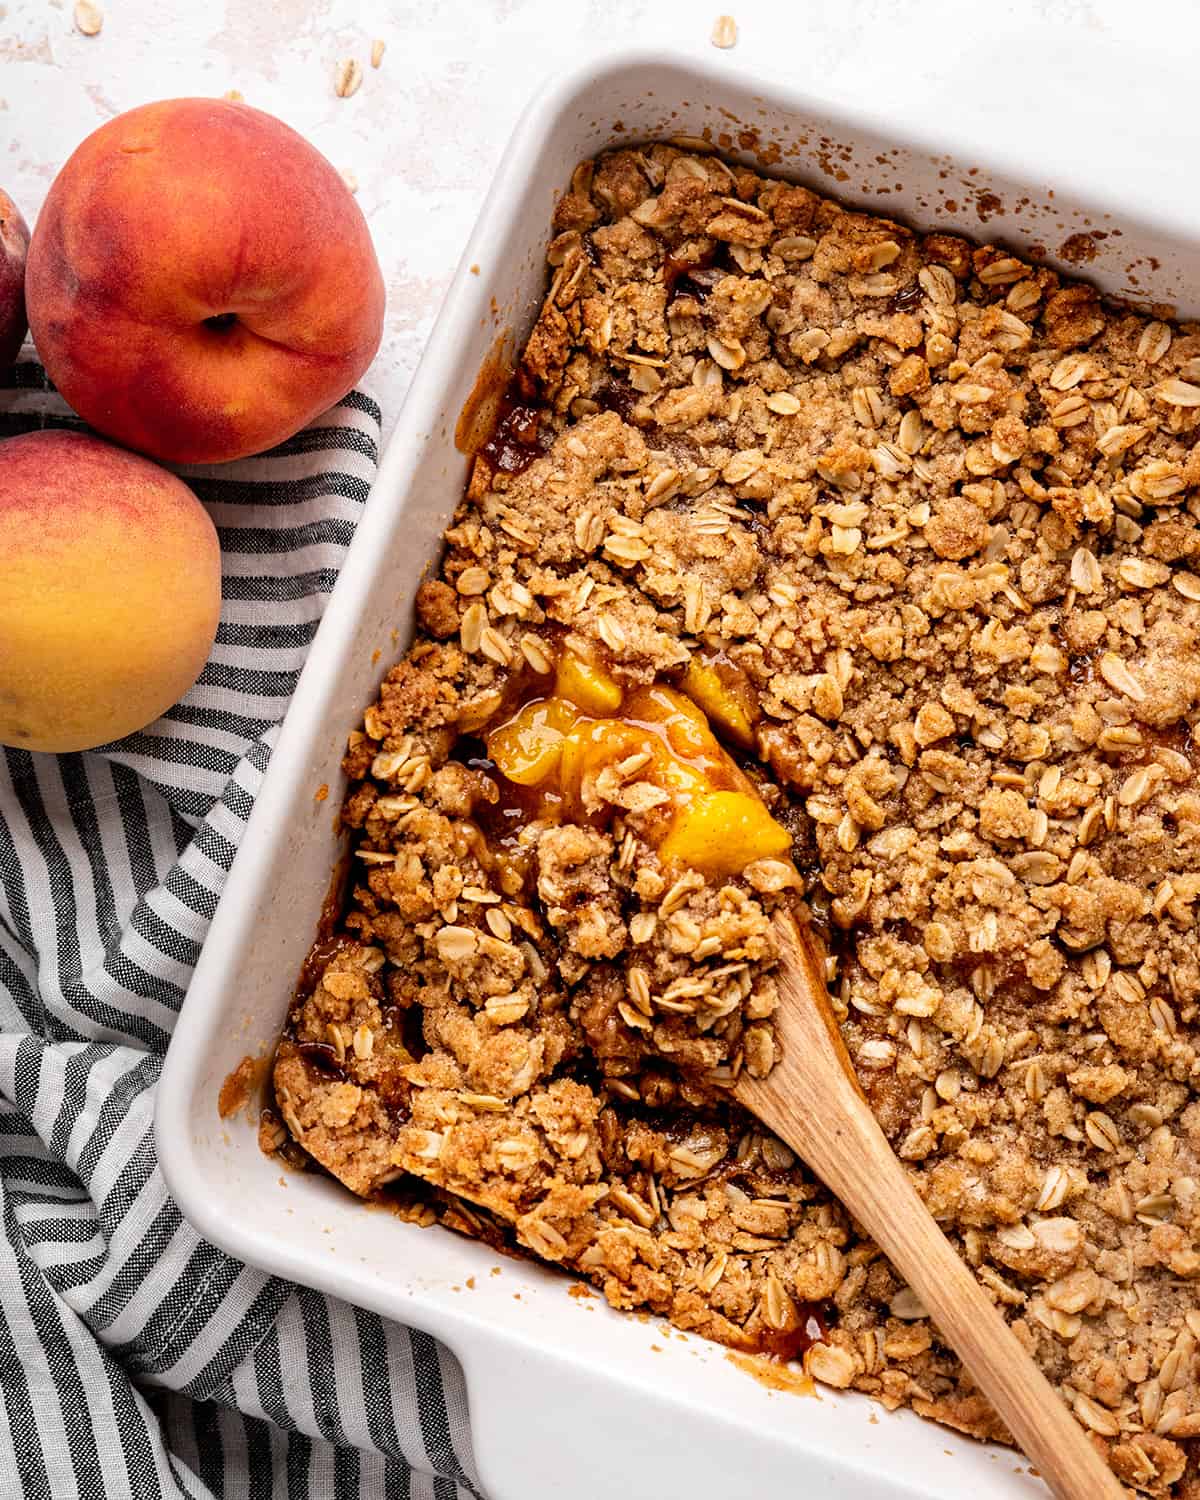 Peach Crisp Recipe in a baking dish with a wooden spoon